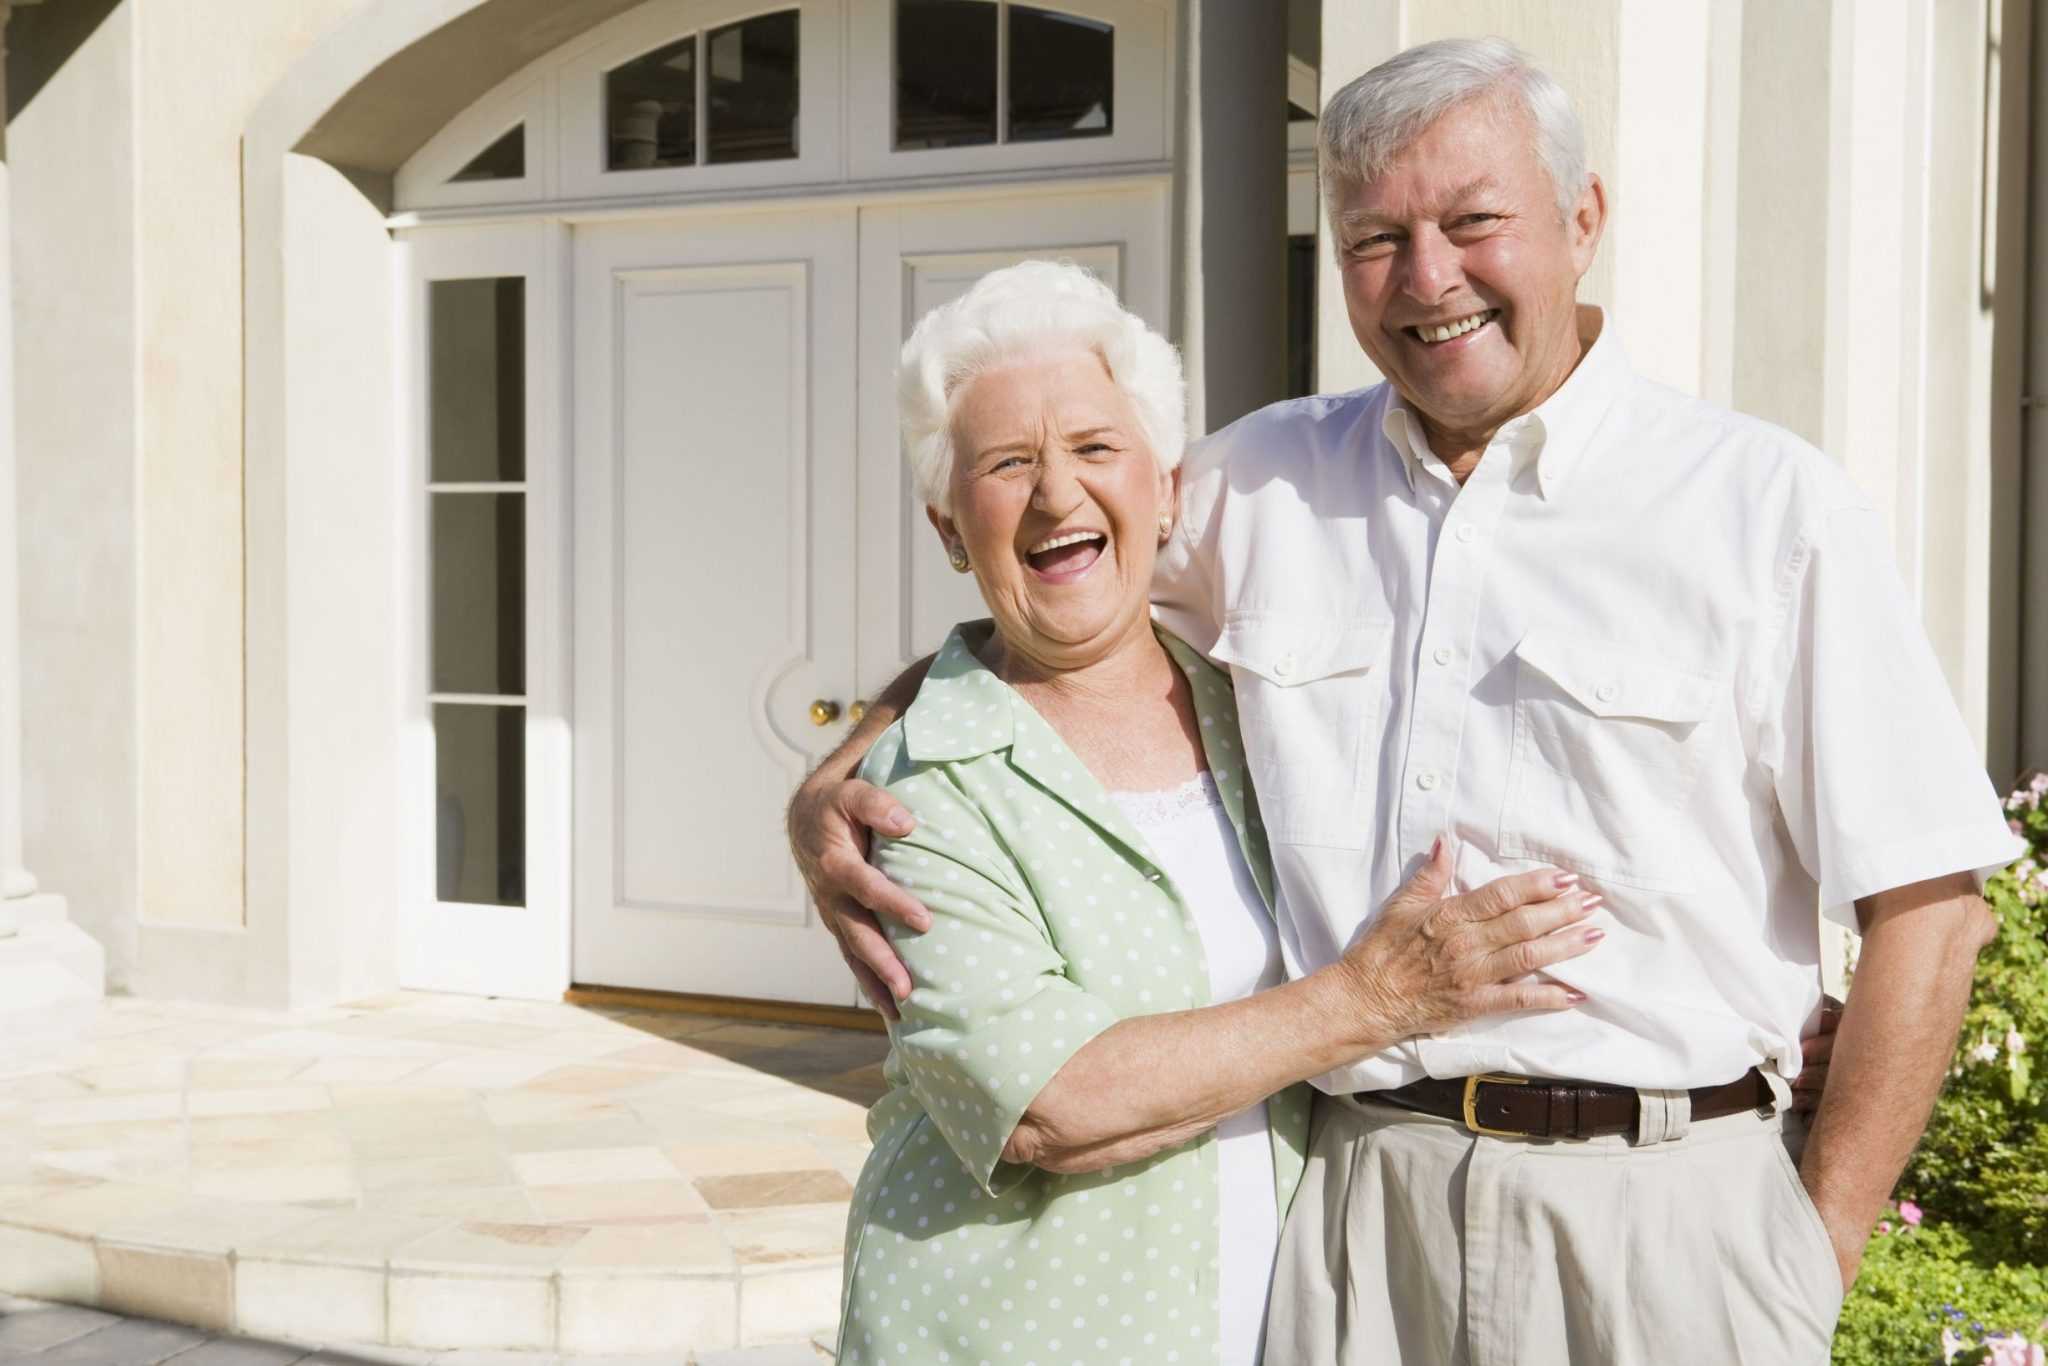 senior-health-how-to-ensure-your-loved-ones-remain-independent-into-their-golden-years